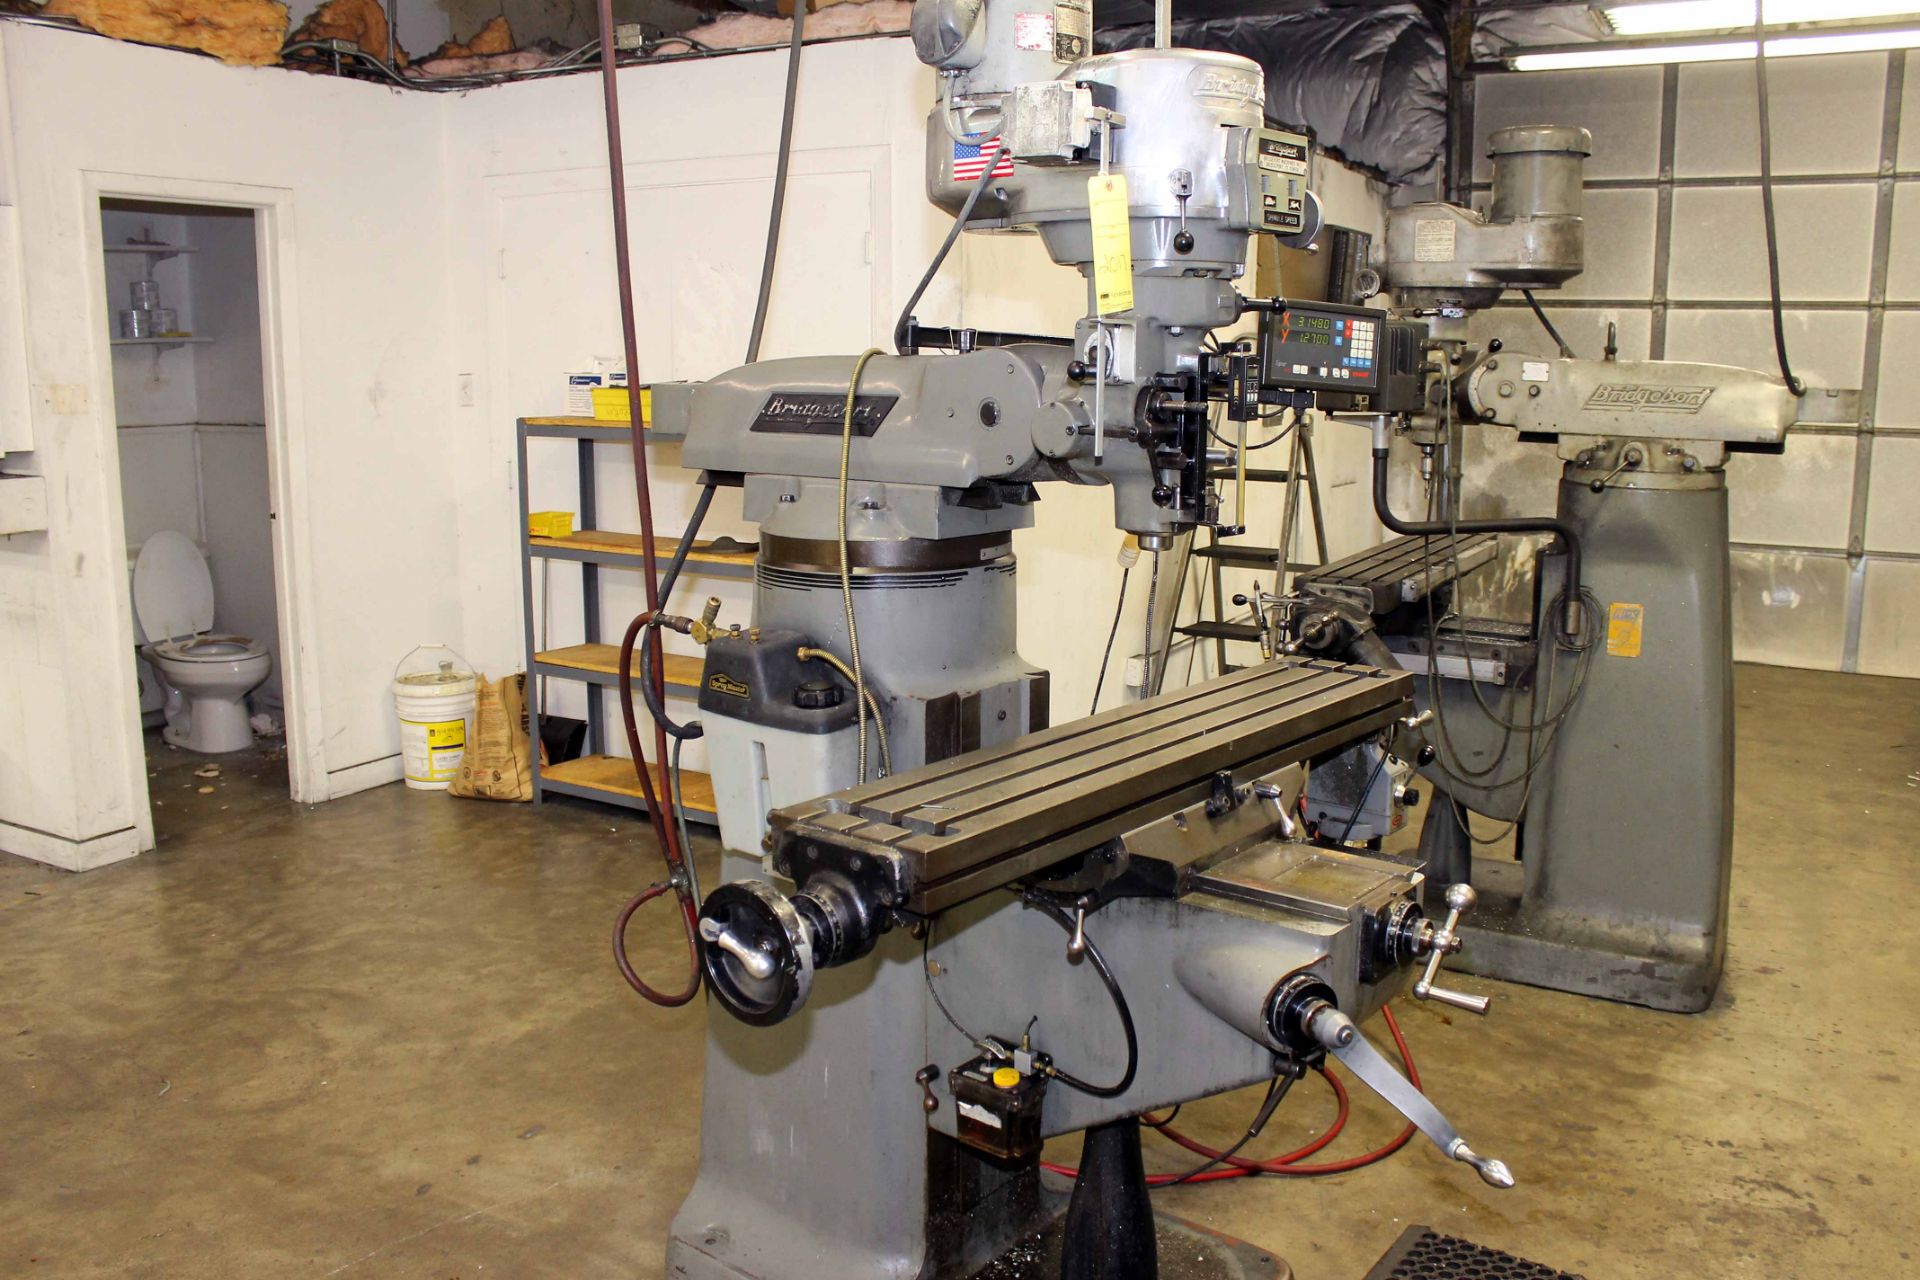 VERTICAL TURRET MILL, BRIDGEPORT SERIES 1, 9" x 48" table, pwr. feed, chrome ways, 2-axis D.R.O.,